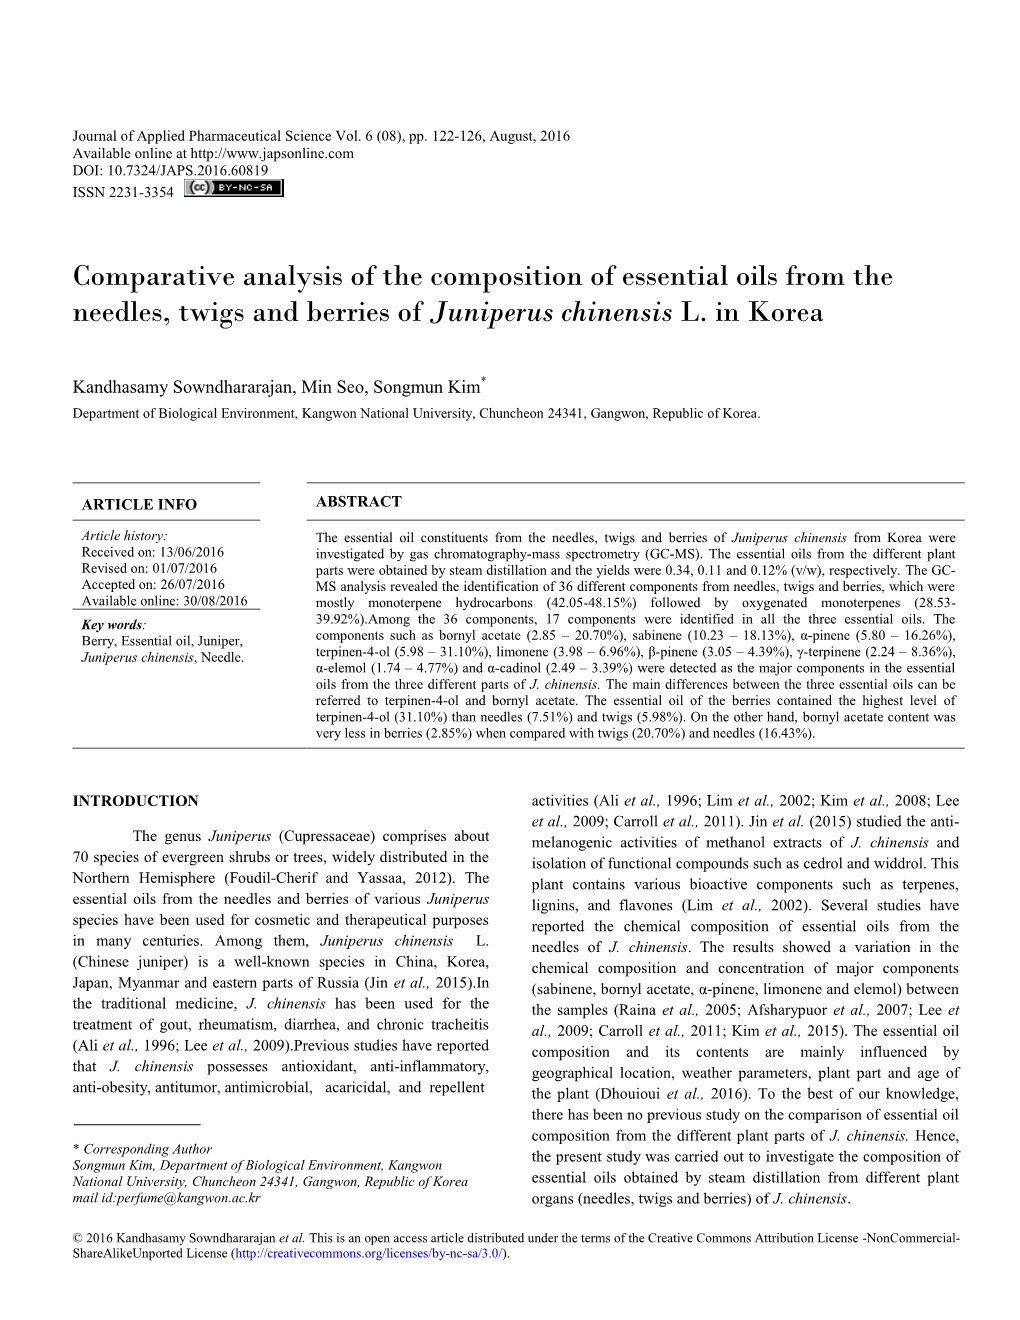 Comparative Analysis of the Composition of Essential Oils from the Needles, Twigs and Berries of Juniperus Chinensis L